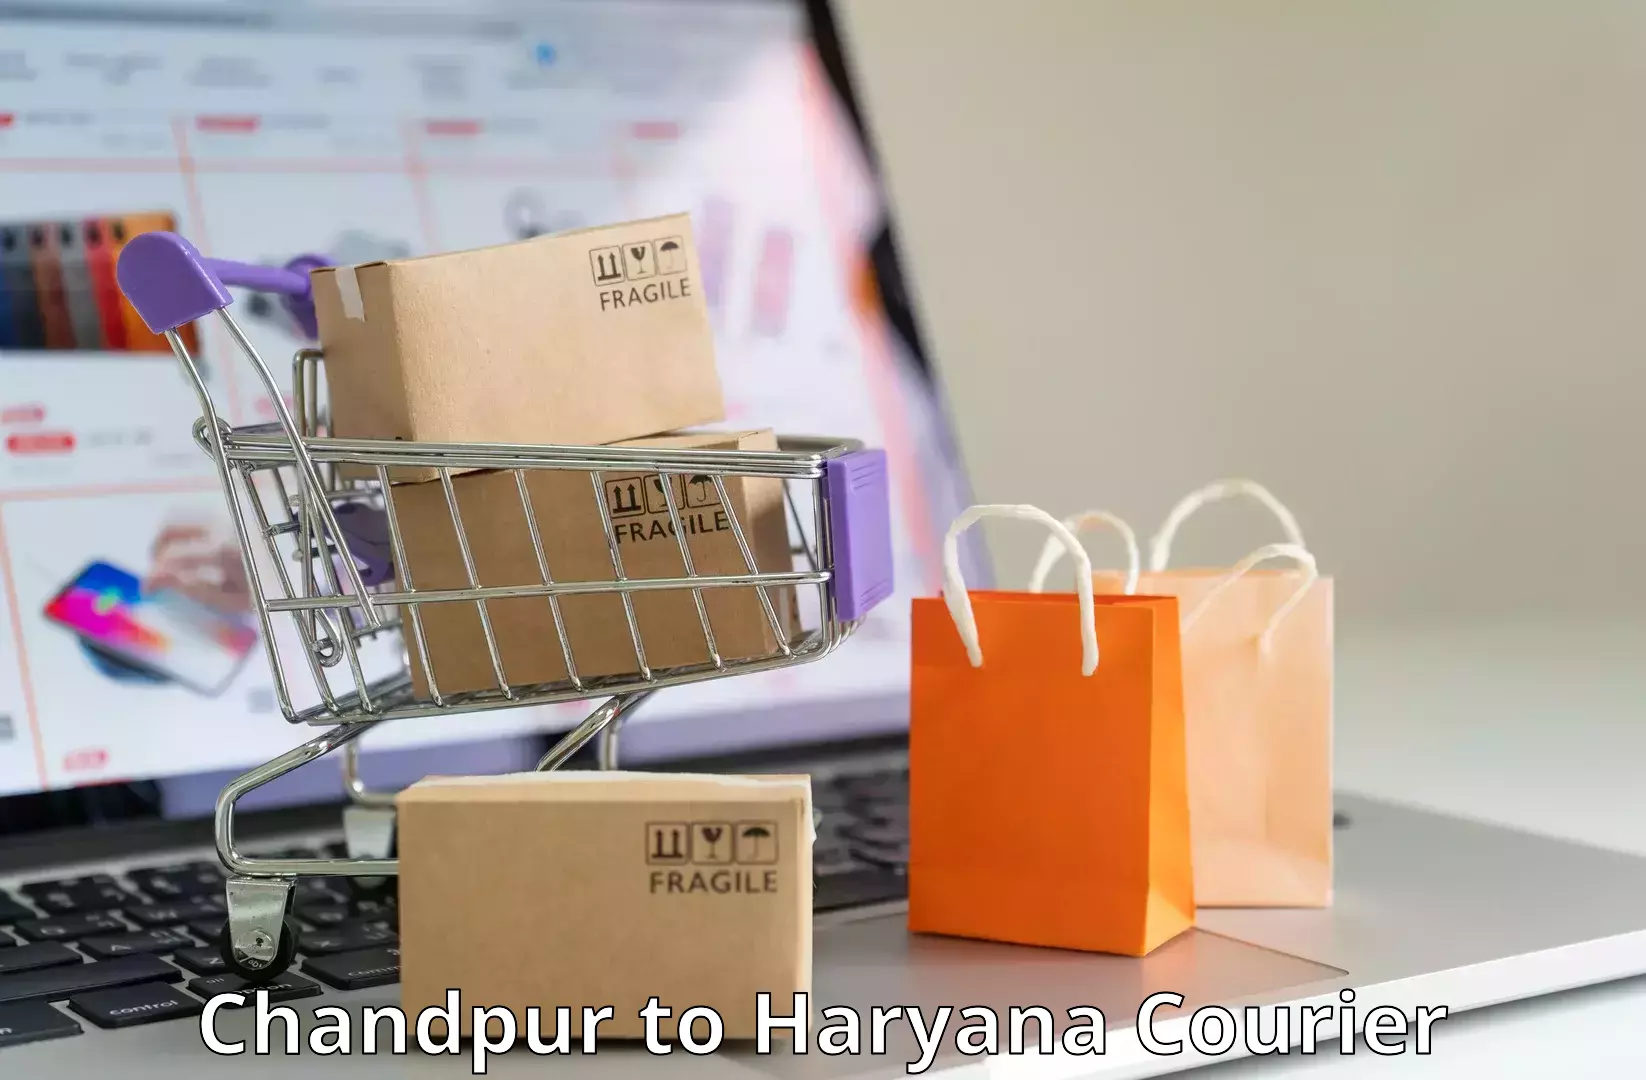 Cost-effective courier solutions Chandpur to NCR Haryana